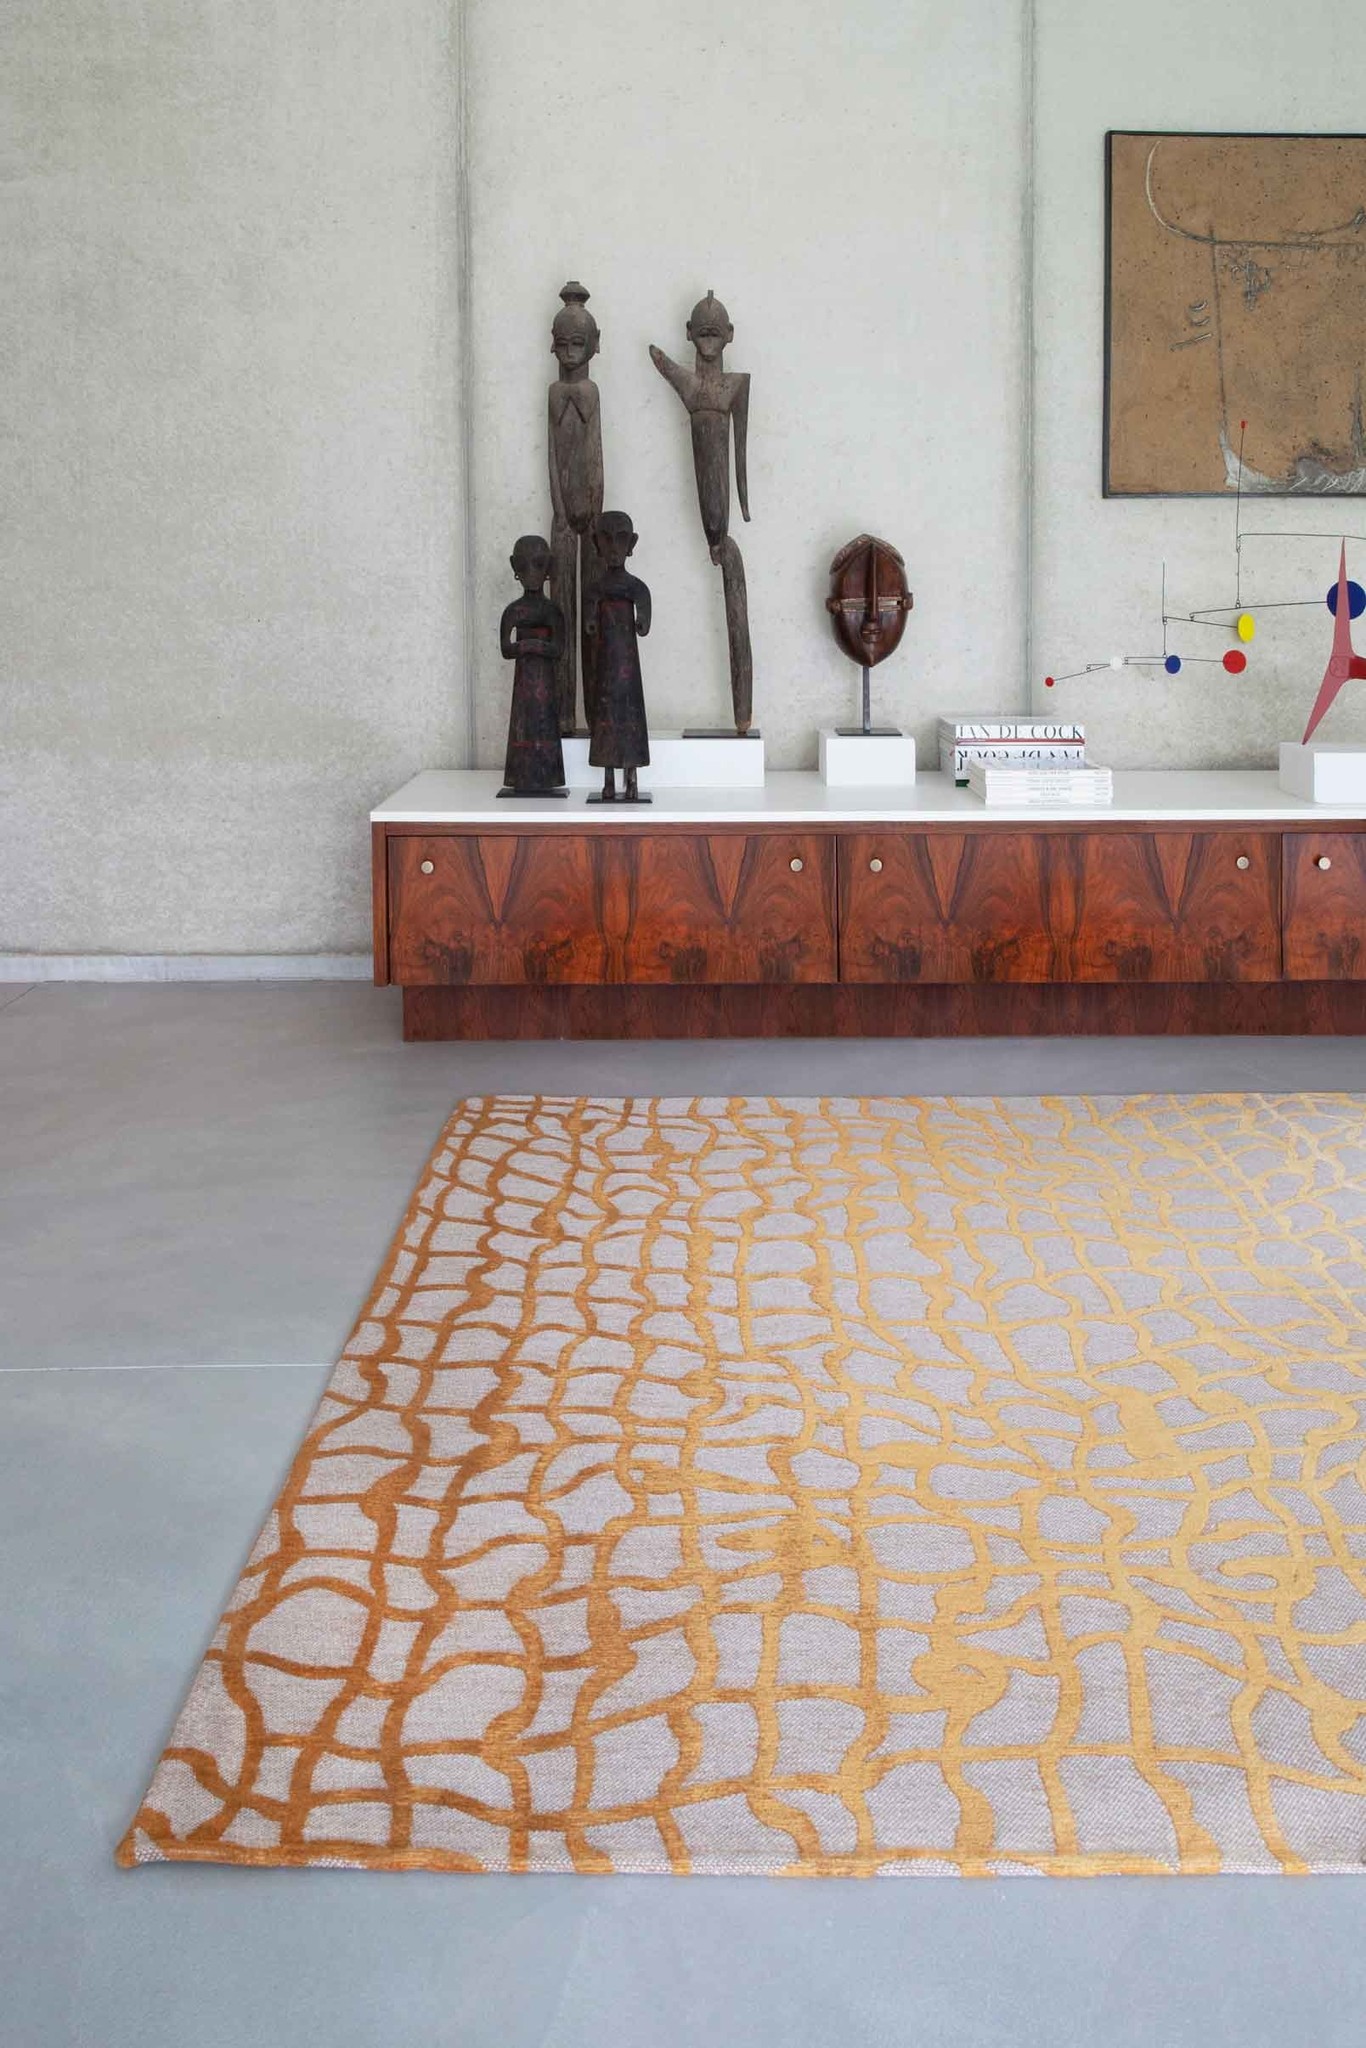 Abstract Gold Flatwoven Rug ☞ Size: 200 x 280 cm